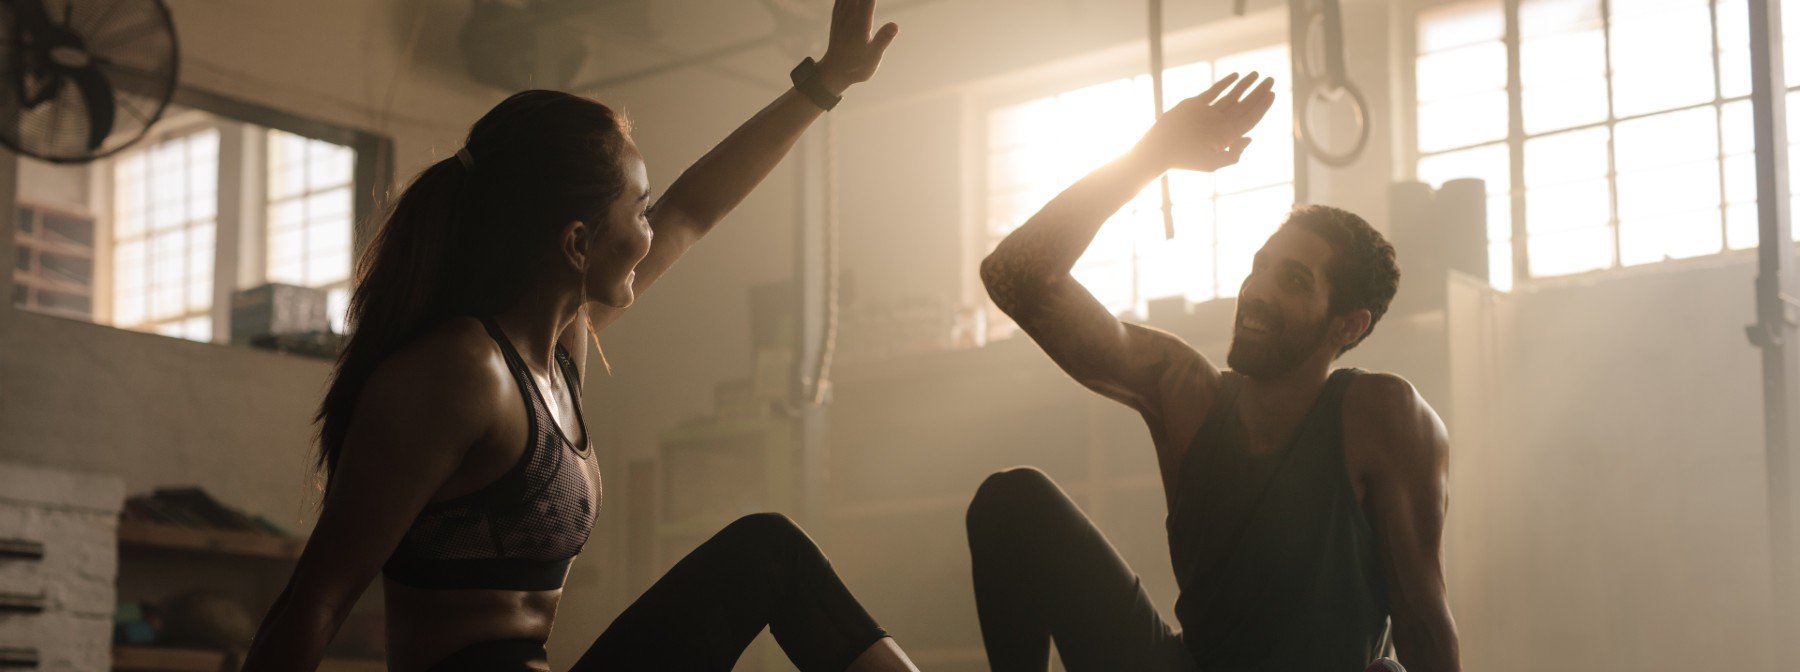 7 Tips For Restarting A Good Gym Routine After Lockdown